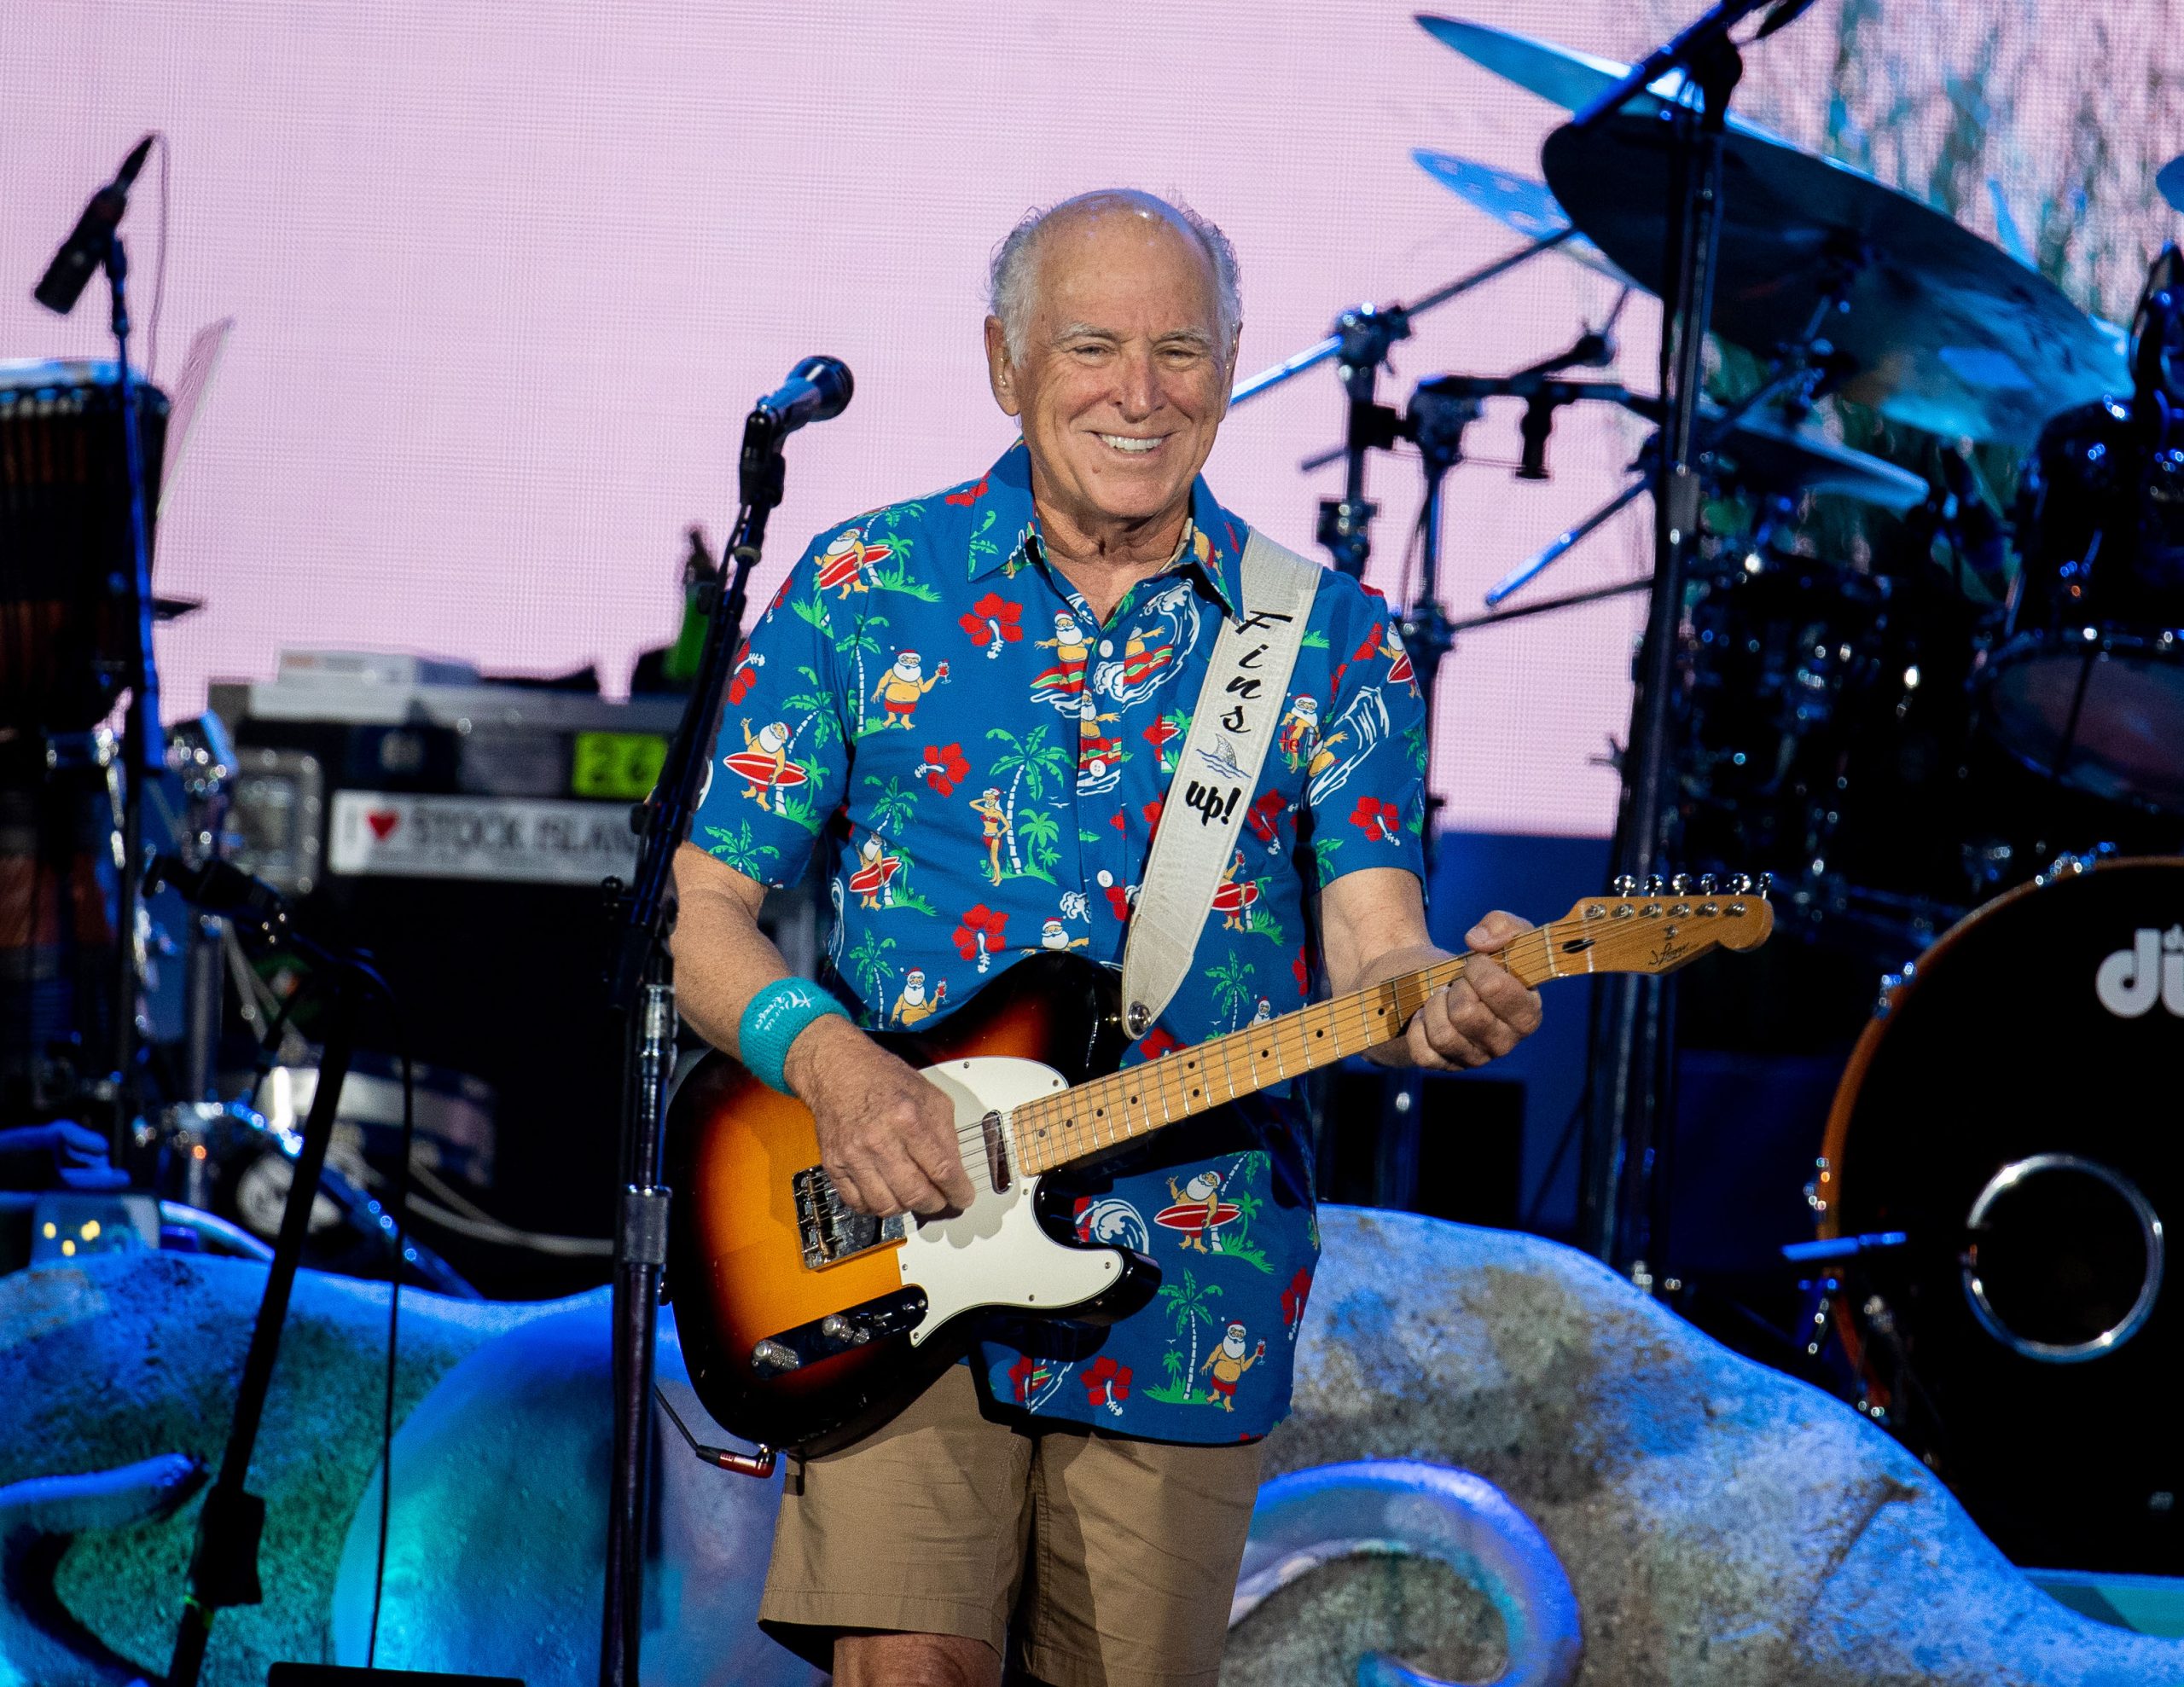 Jimmy Buffett and the Coral Reefers at iThink Financial Amp 12.9.21 with Mac McAnally ©jskolnickphotography